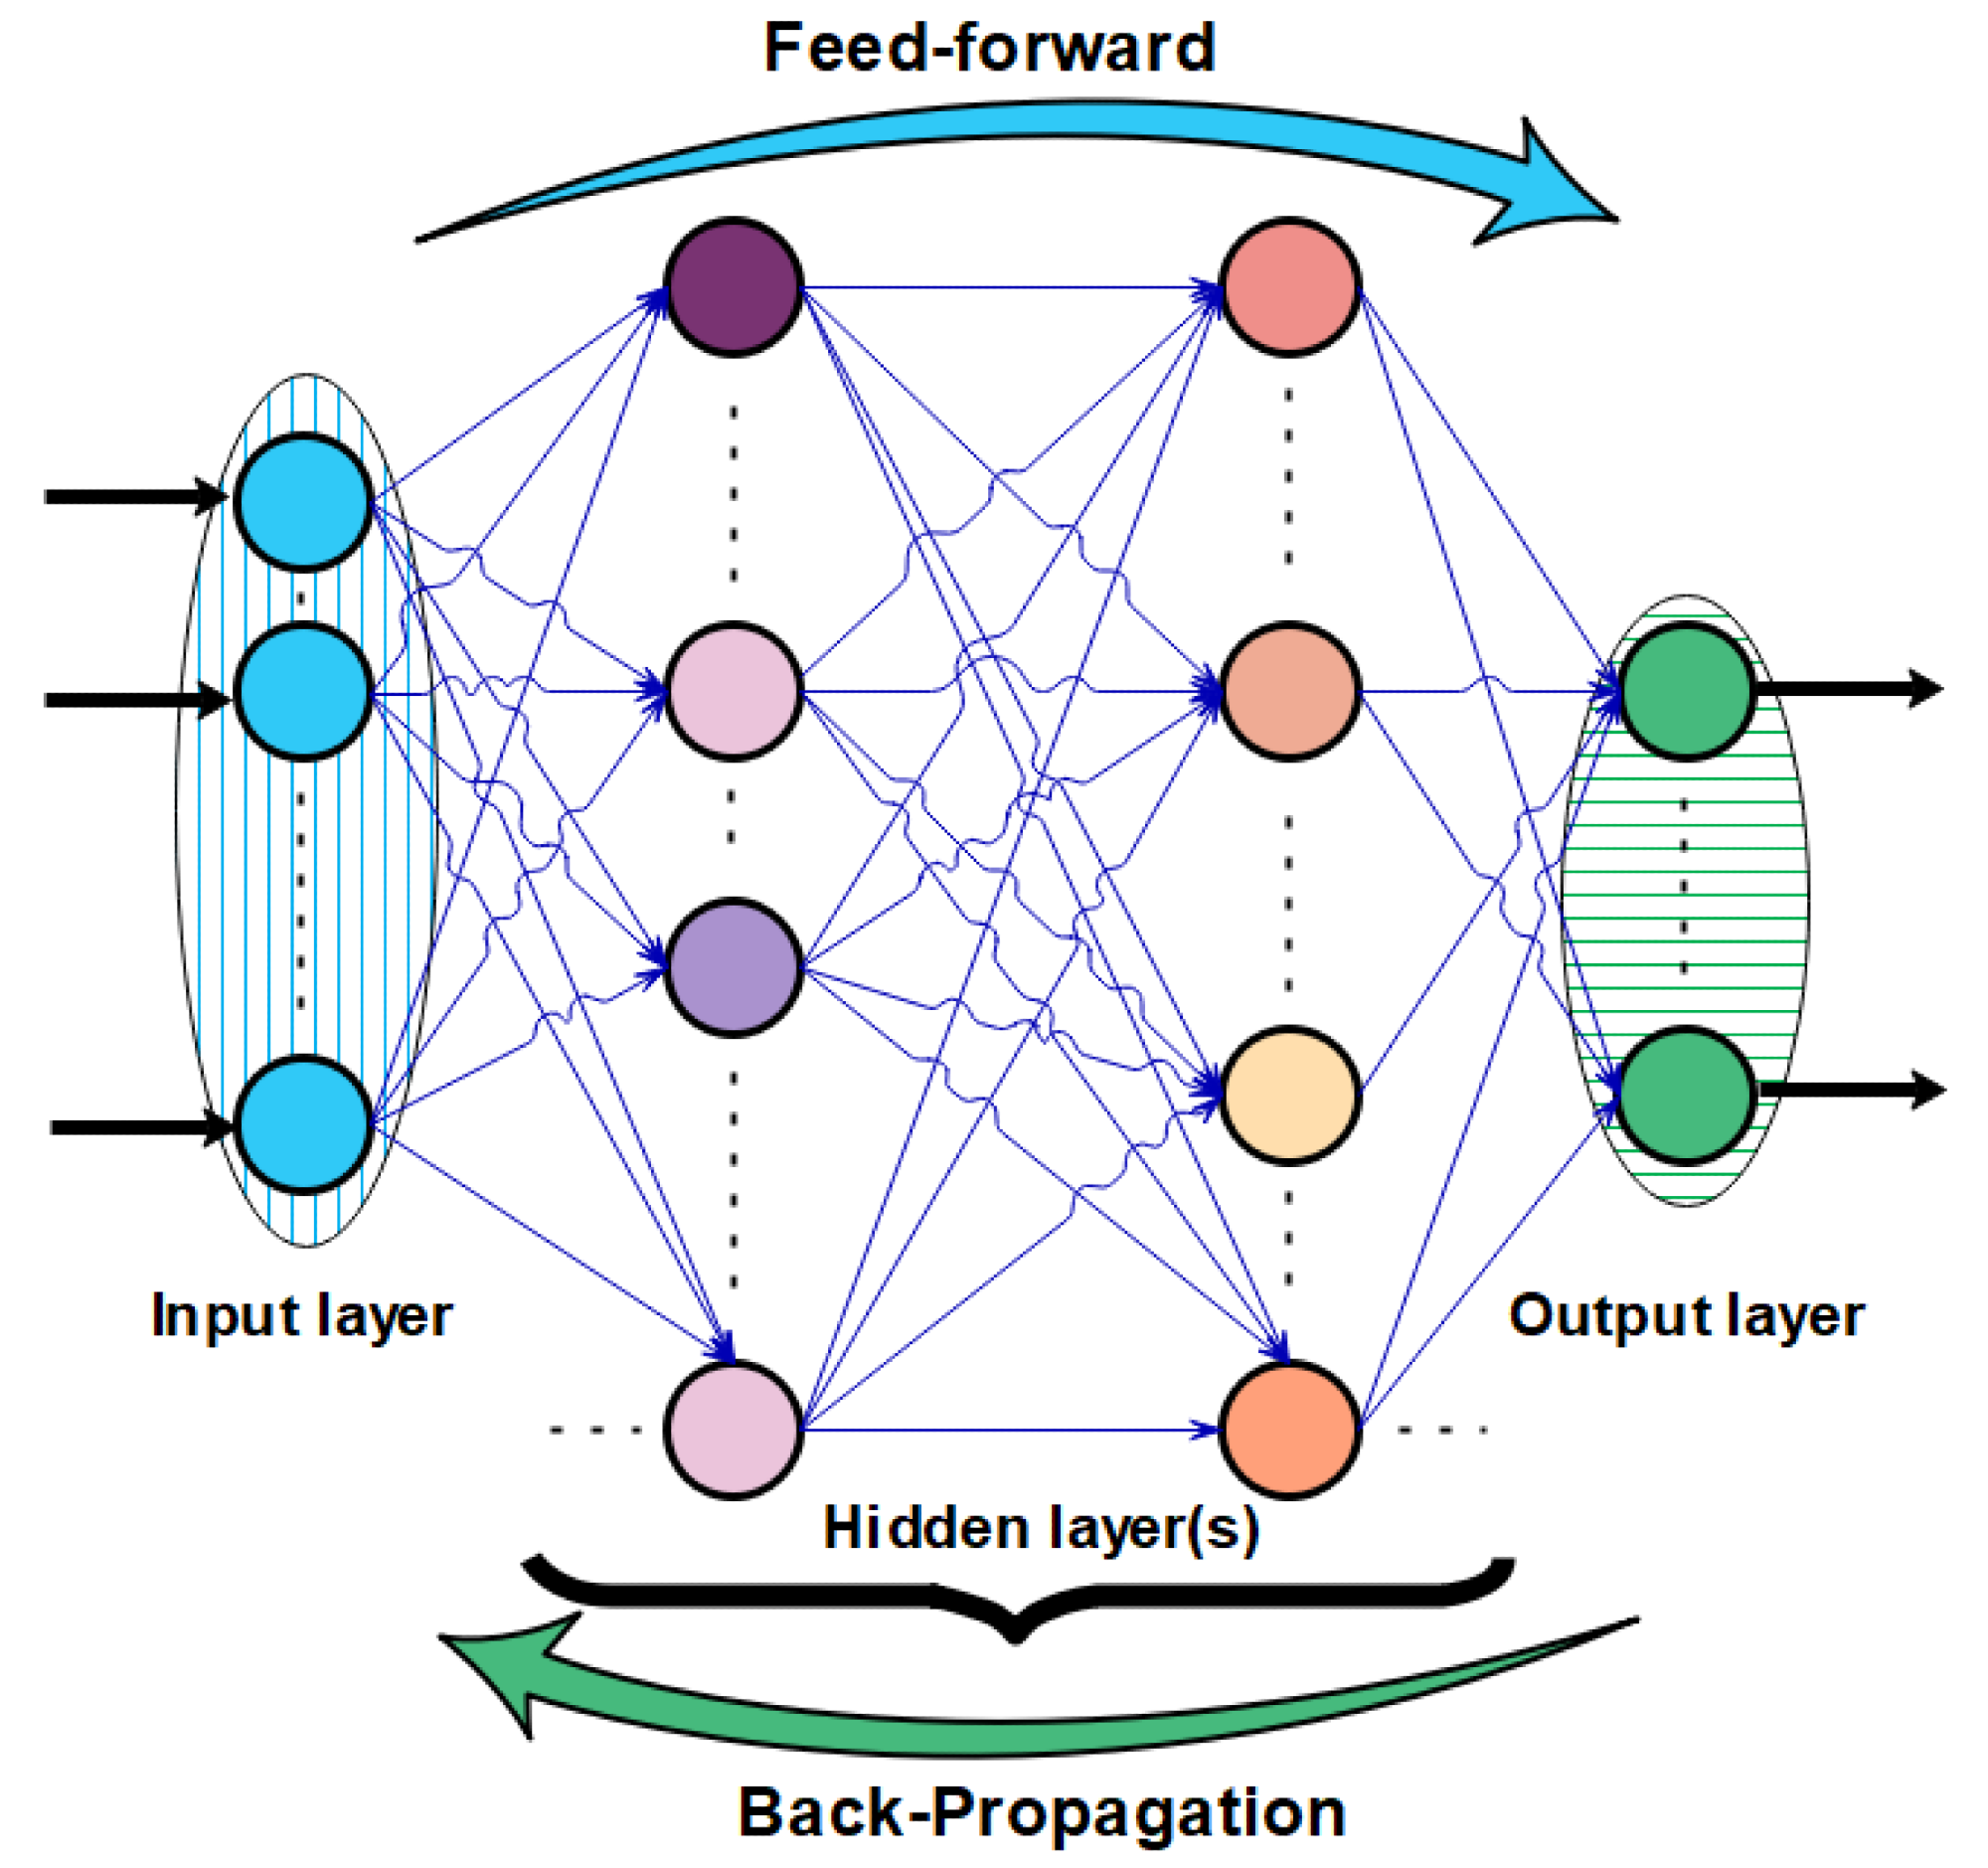 Architecture of applied neural network and learning process principle.